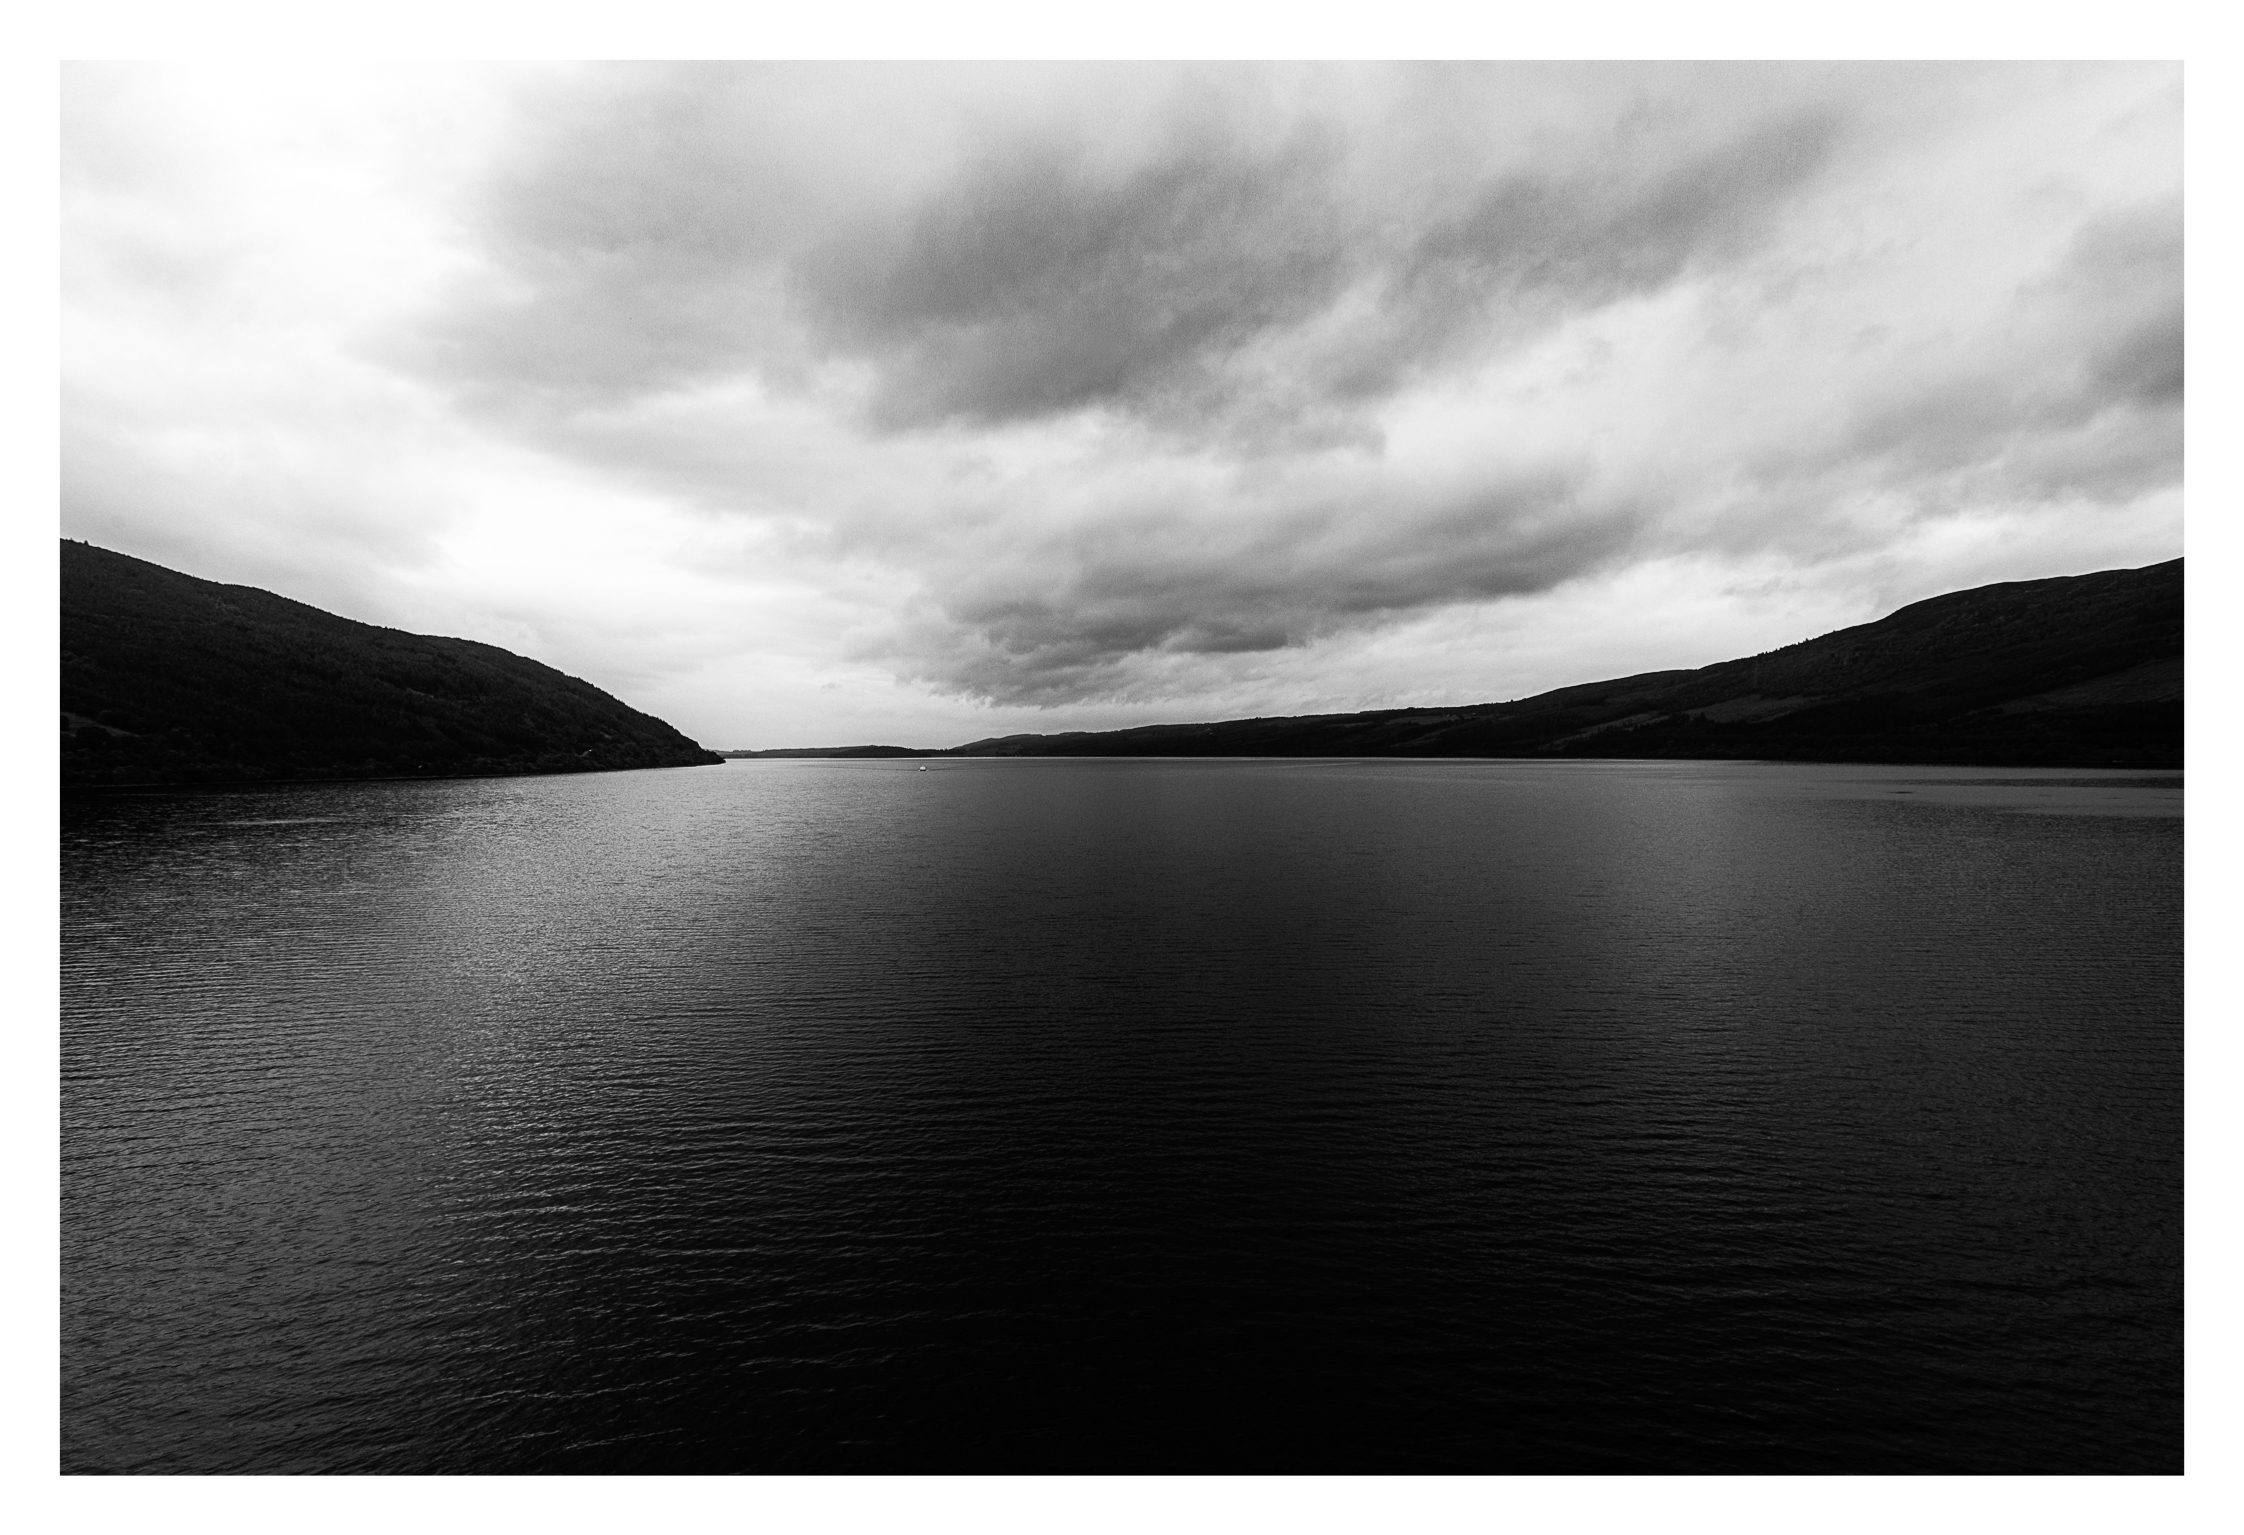 Black water of the Lochness...